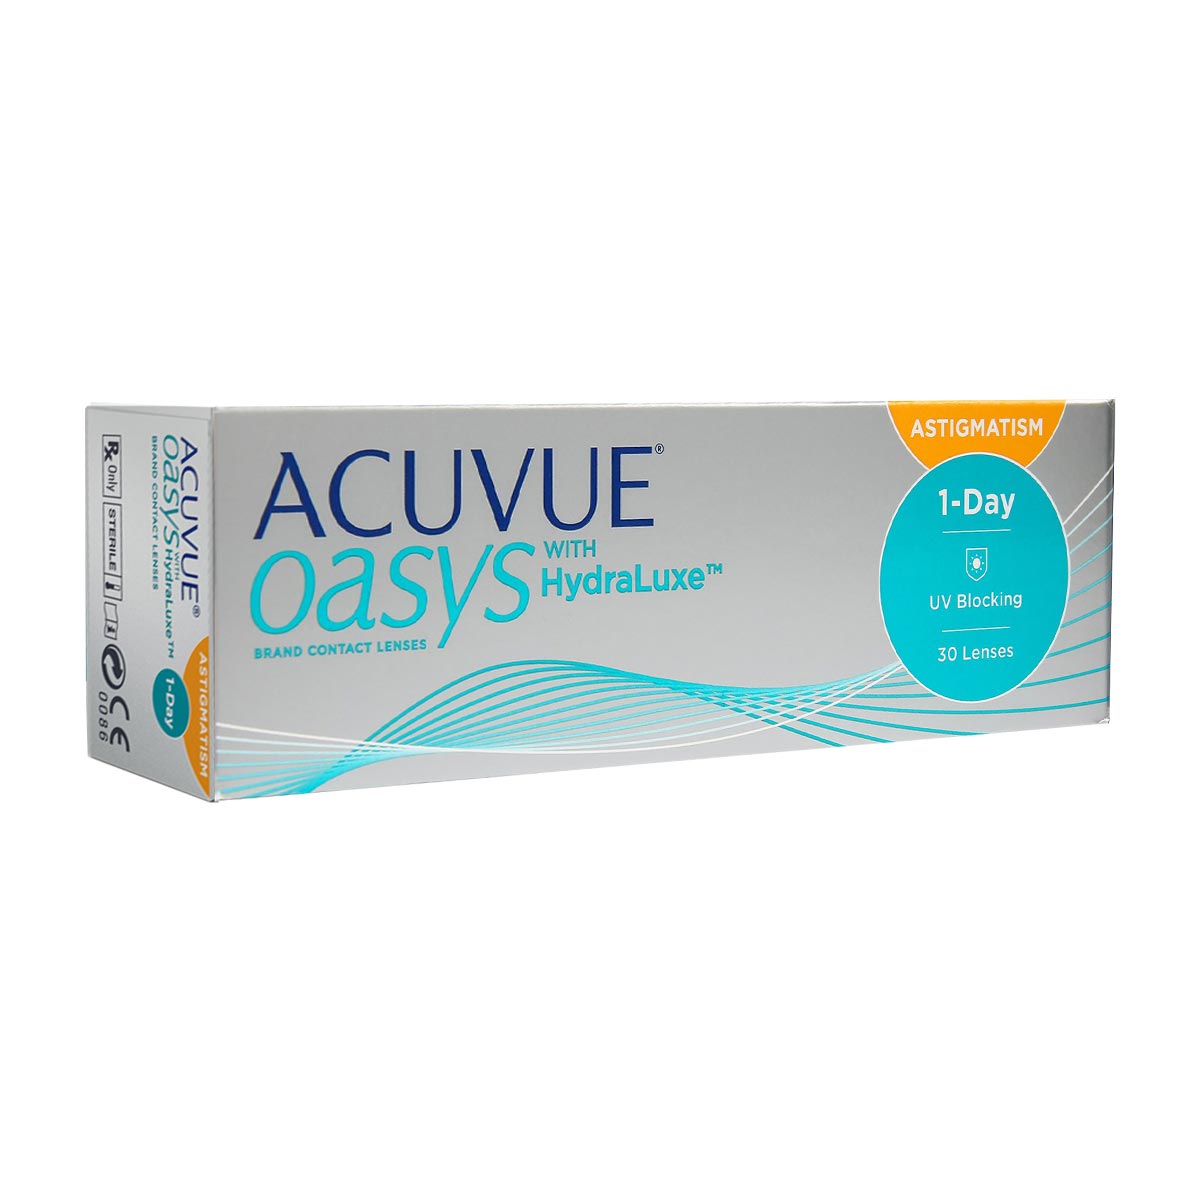 acuvue-oasys-1-day-for-astigmatism-30-pack-review-9-4-10-rating